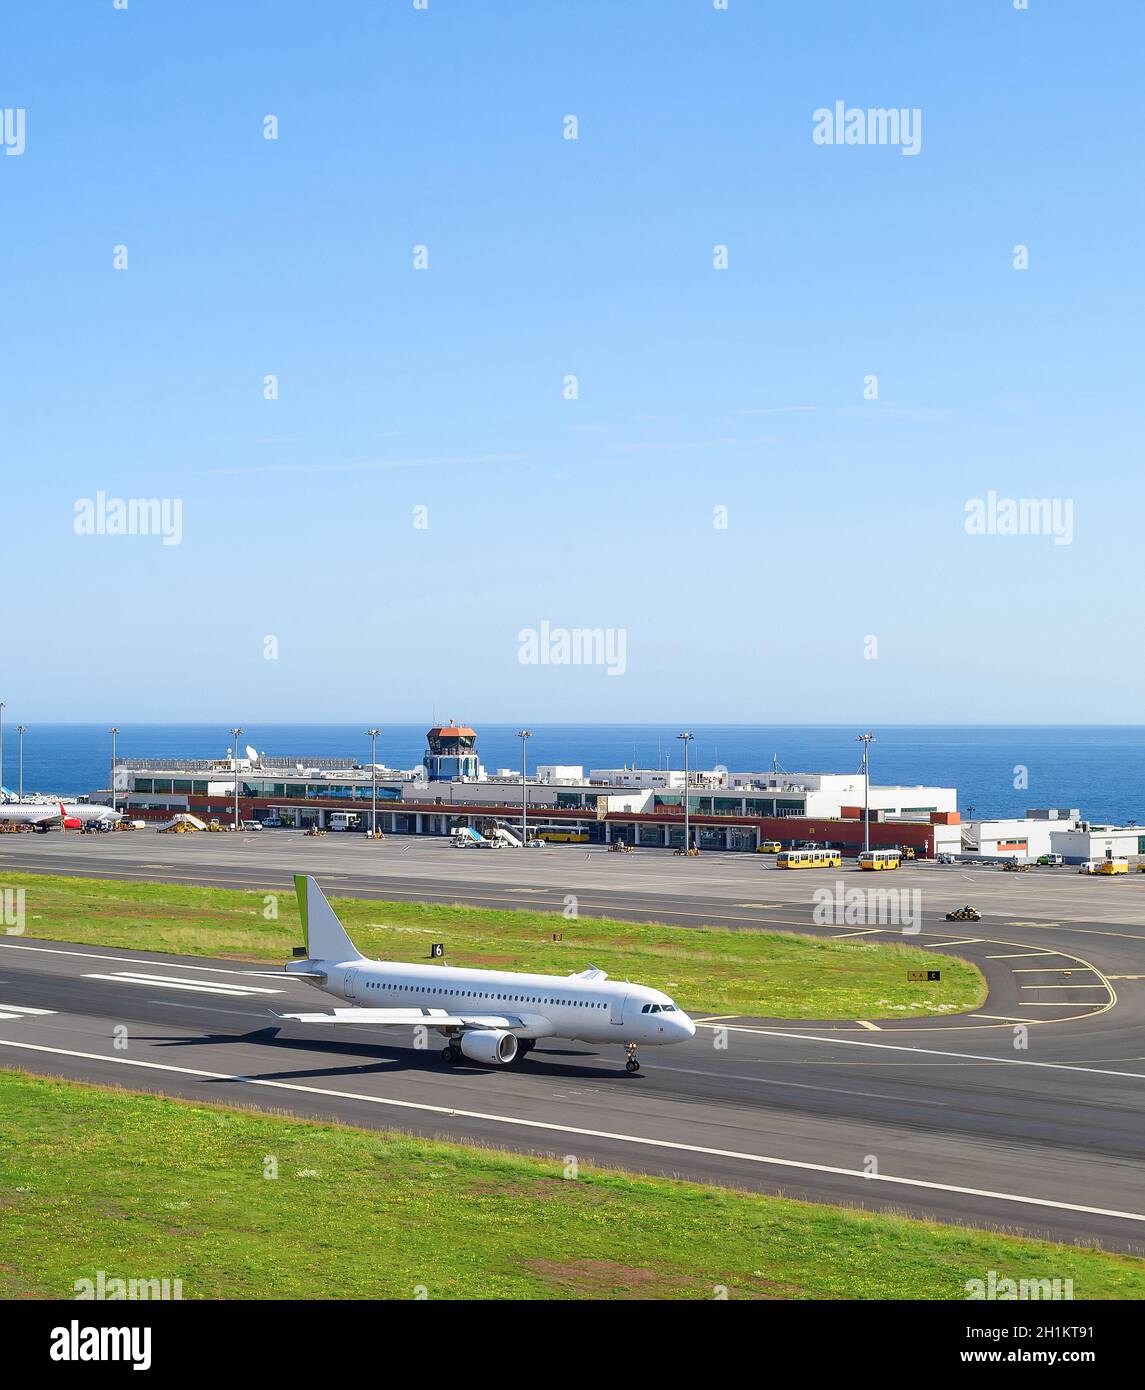 Airplane at runway, airport terminal in background, seascape, Madeira, Portugal Stock Photo